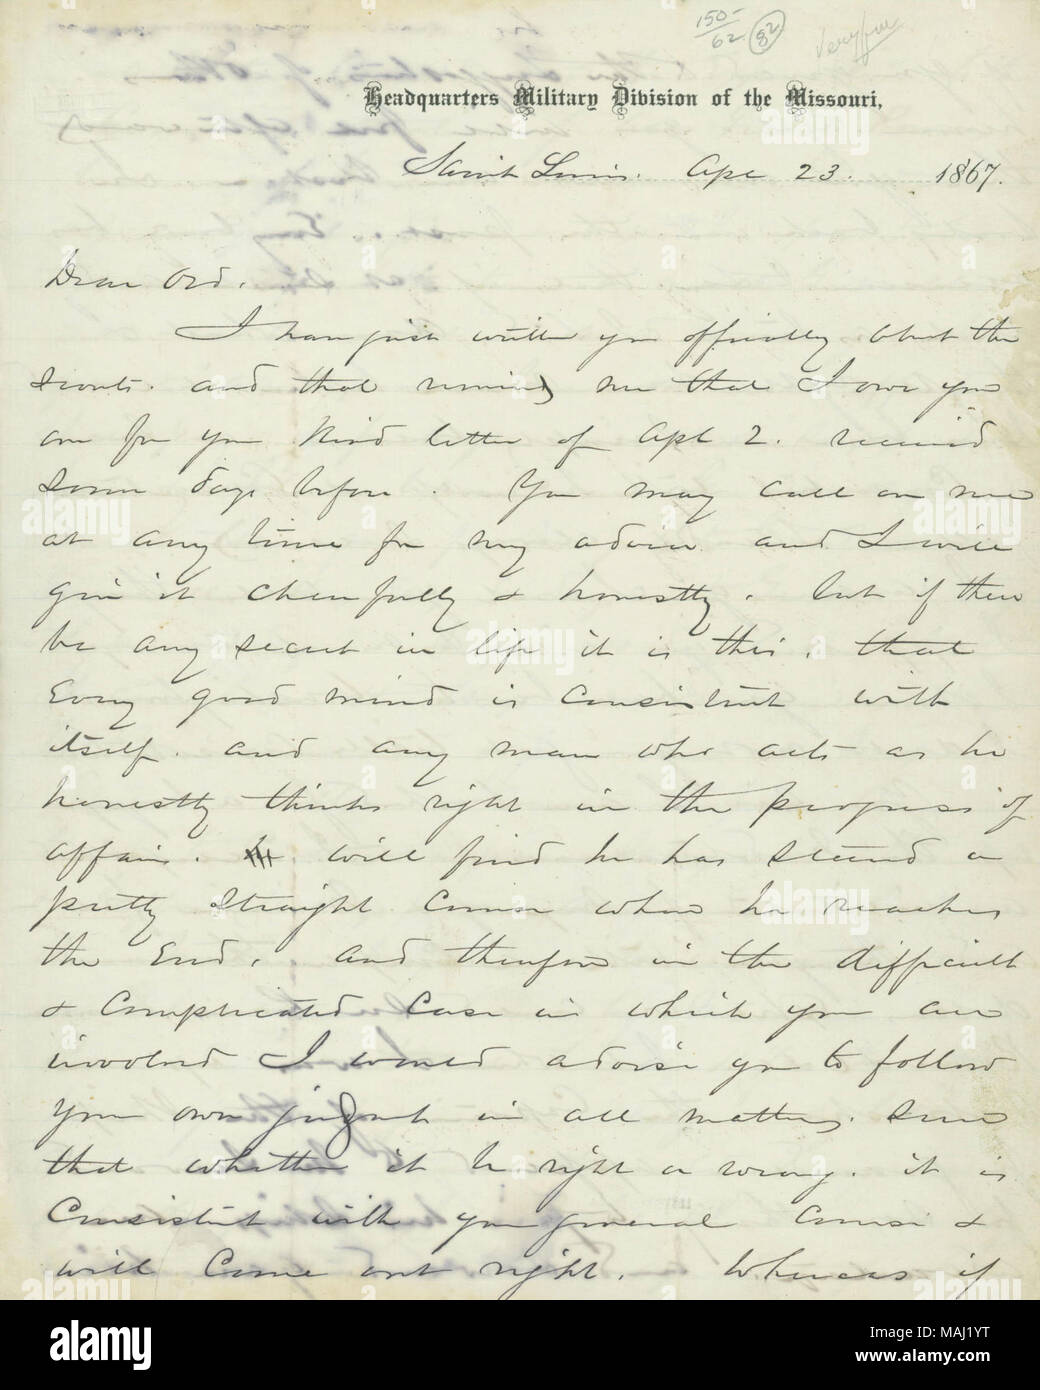 Informs Ord of a planned Mediterranean tour with his daughter Minnie Sherman. Expresses his disappointment that the tour will involve command matters. Refers to the loss of his son Willy at Vicksburg during the Civil War. Title: Letter signed W.T. Sherman to [E.O.C.] Ord, April 23, 1867  . 23 April 1867. Sherman, William T. (William Tecumseh), 1820-1891 Stock Photo